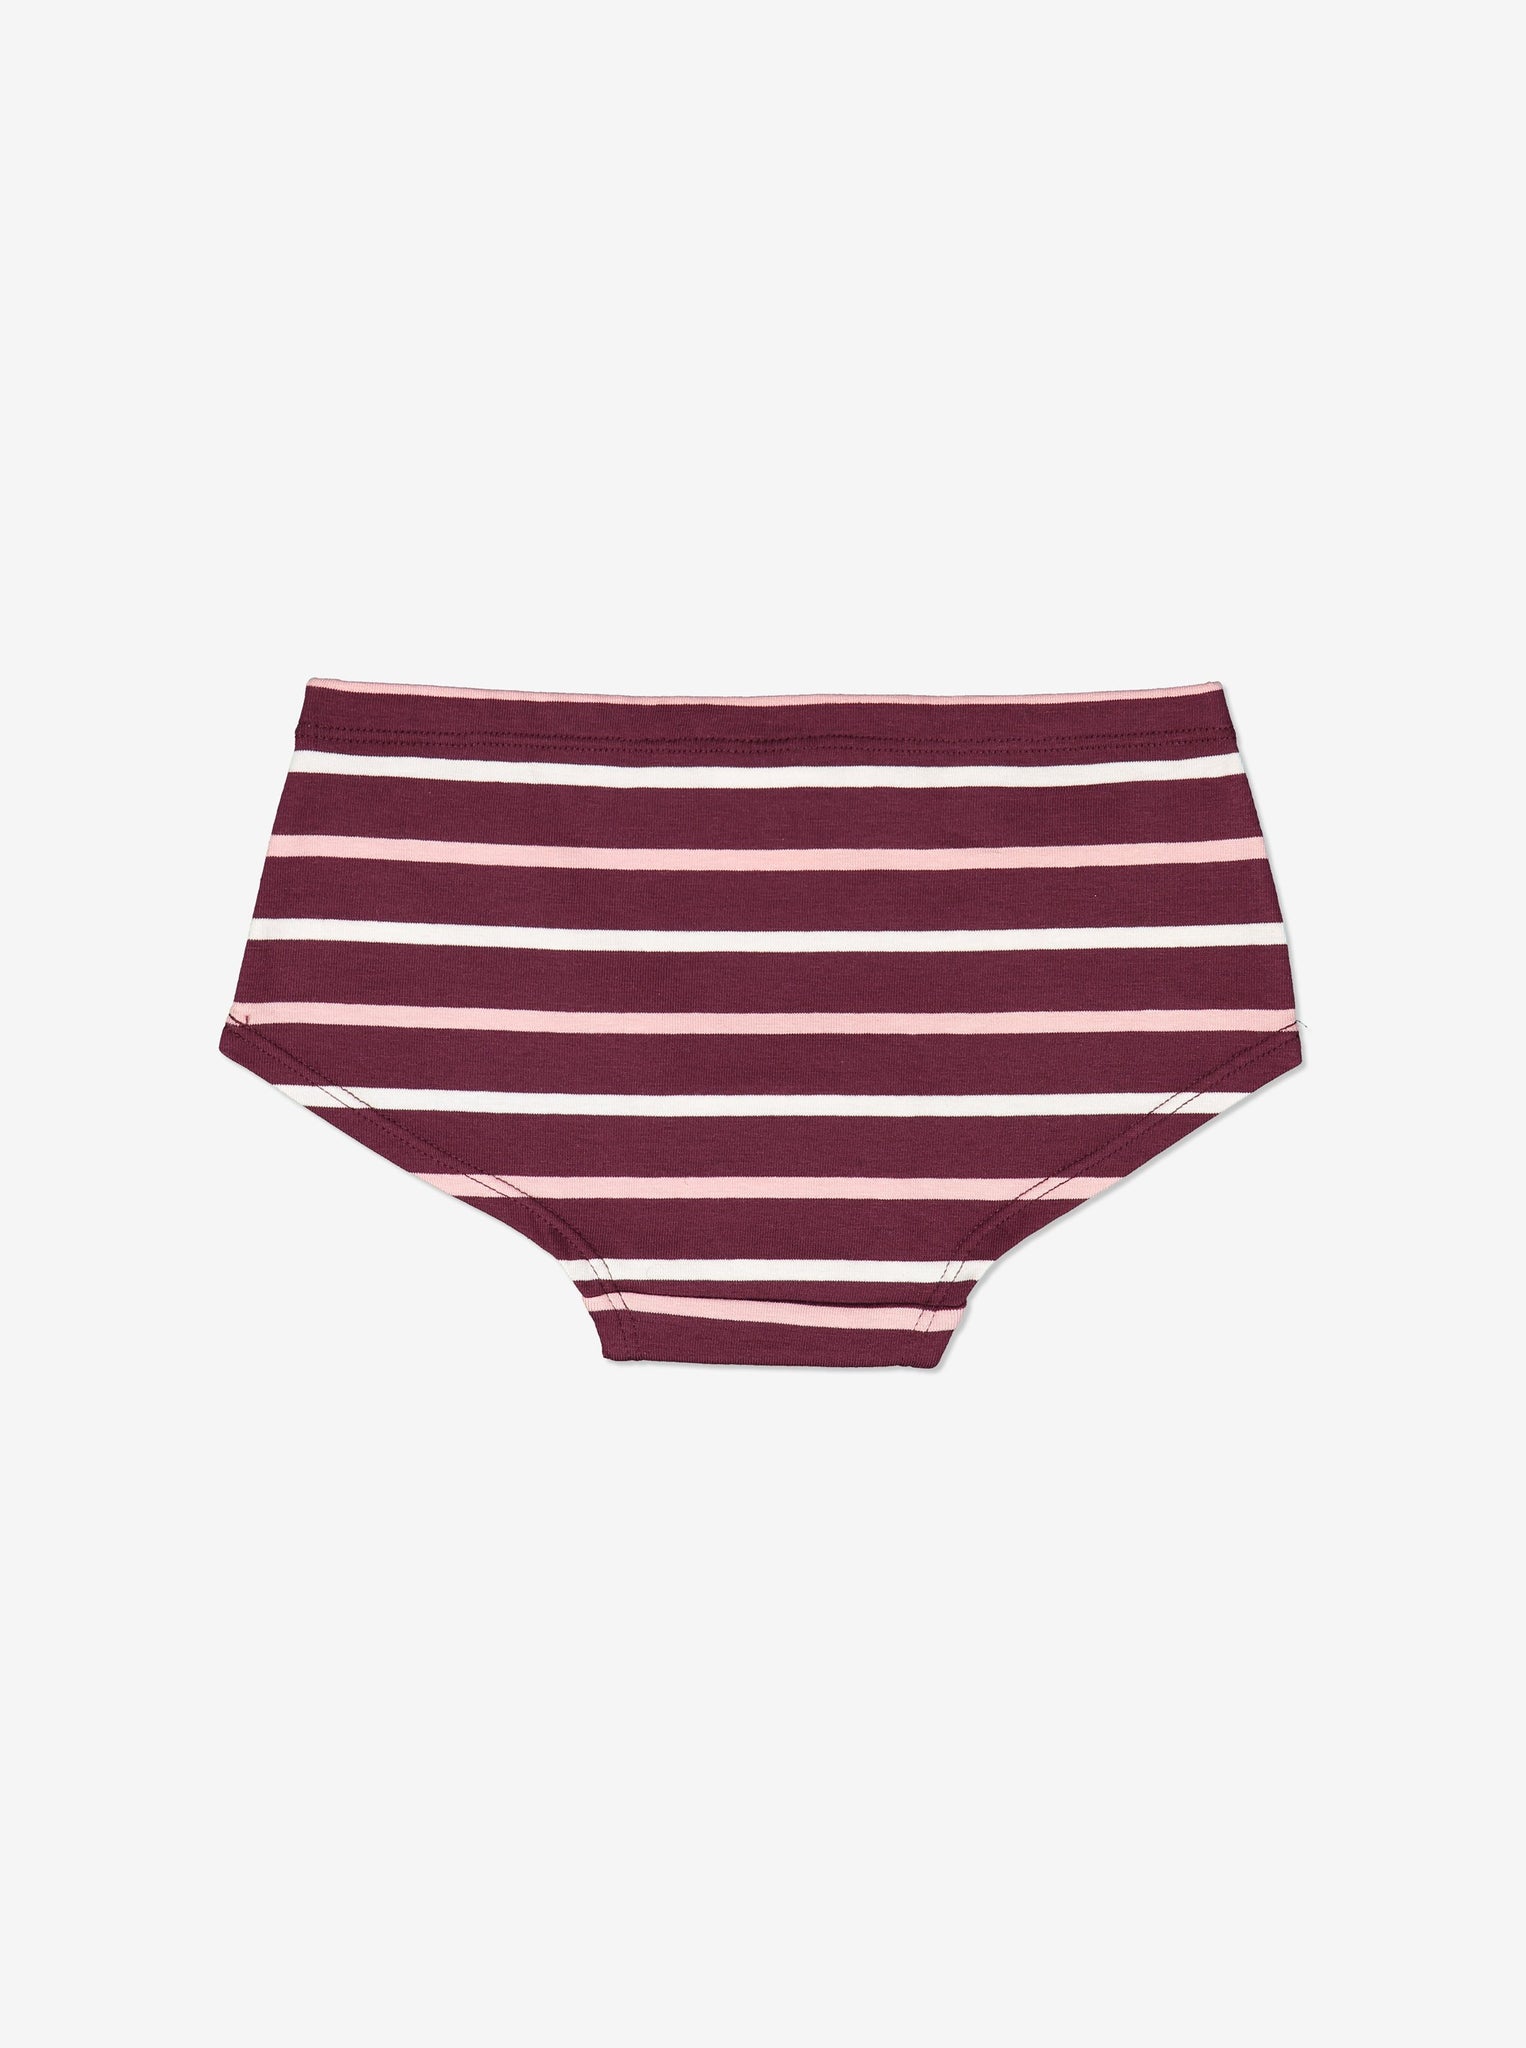 Striped Girls Cotton Knickers, Ethical Kids Clothes | Polarn O. Pyret UK